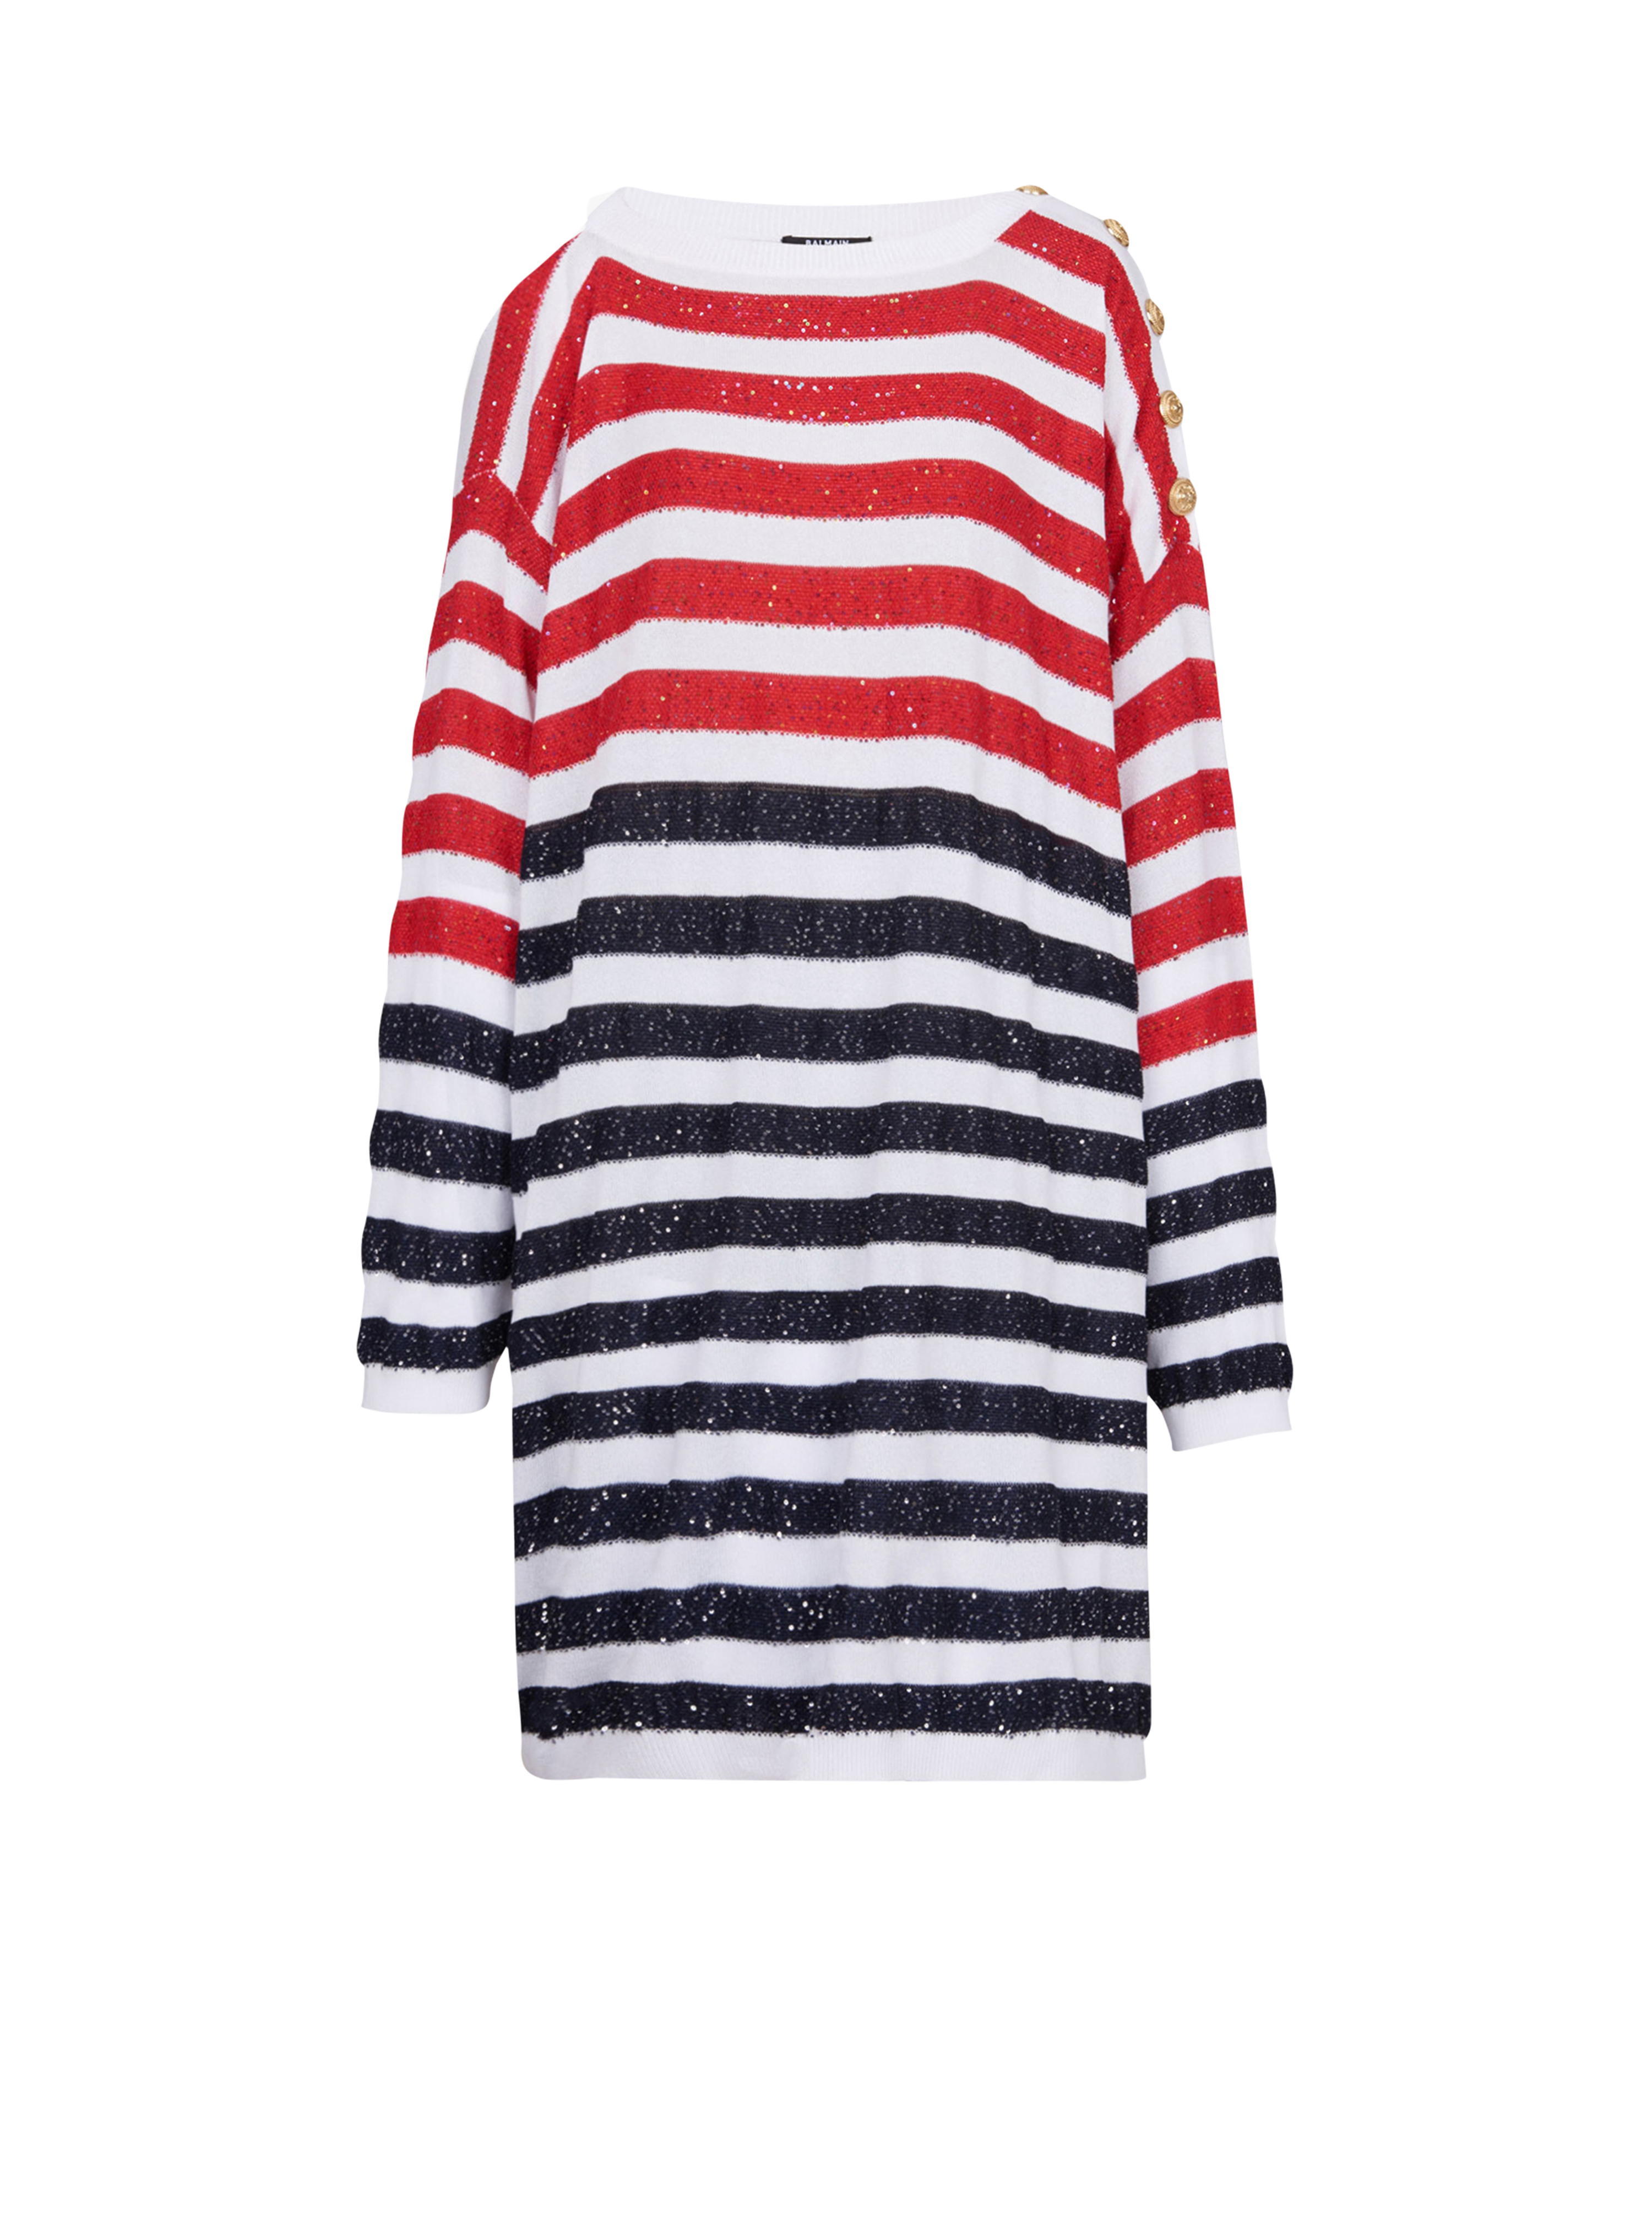 HIGH SUMMER CAPSULE -Striped knit dress, multicolor